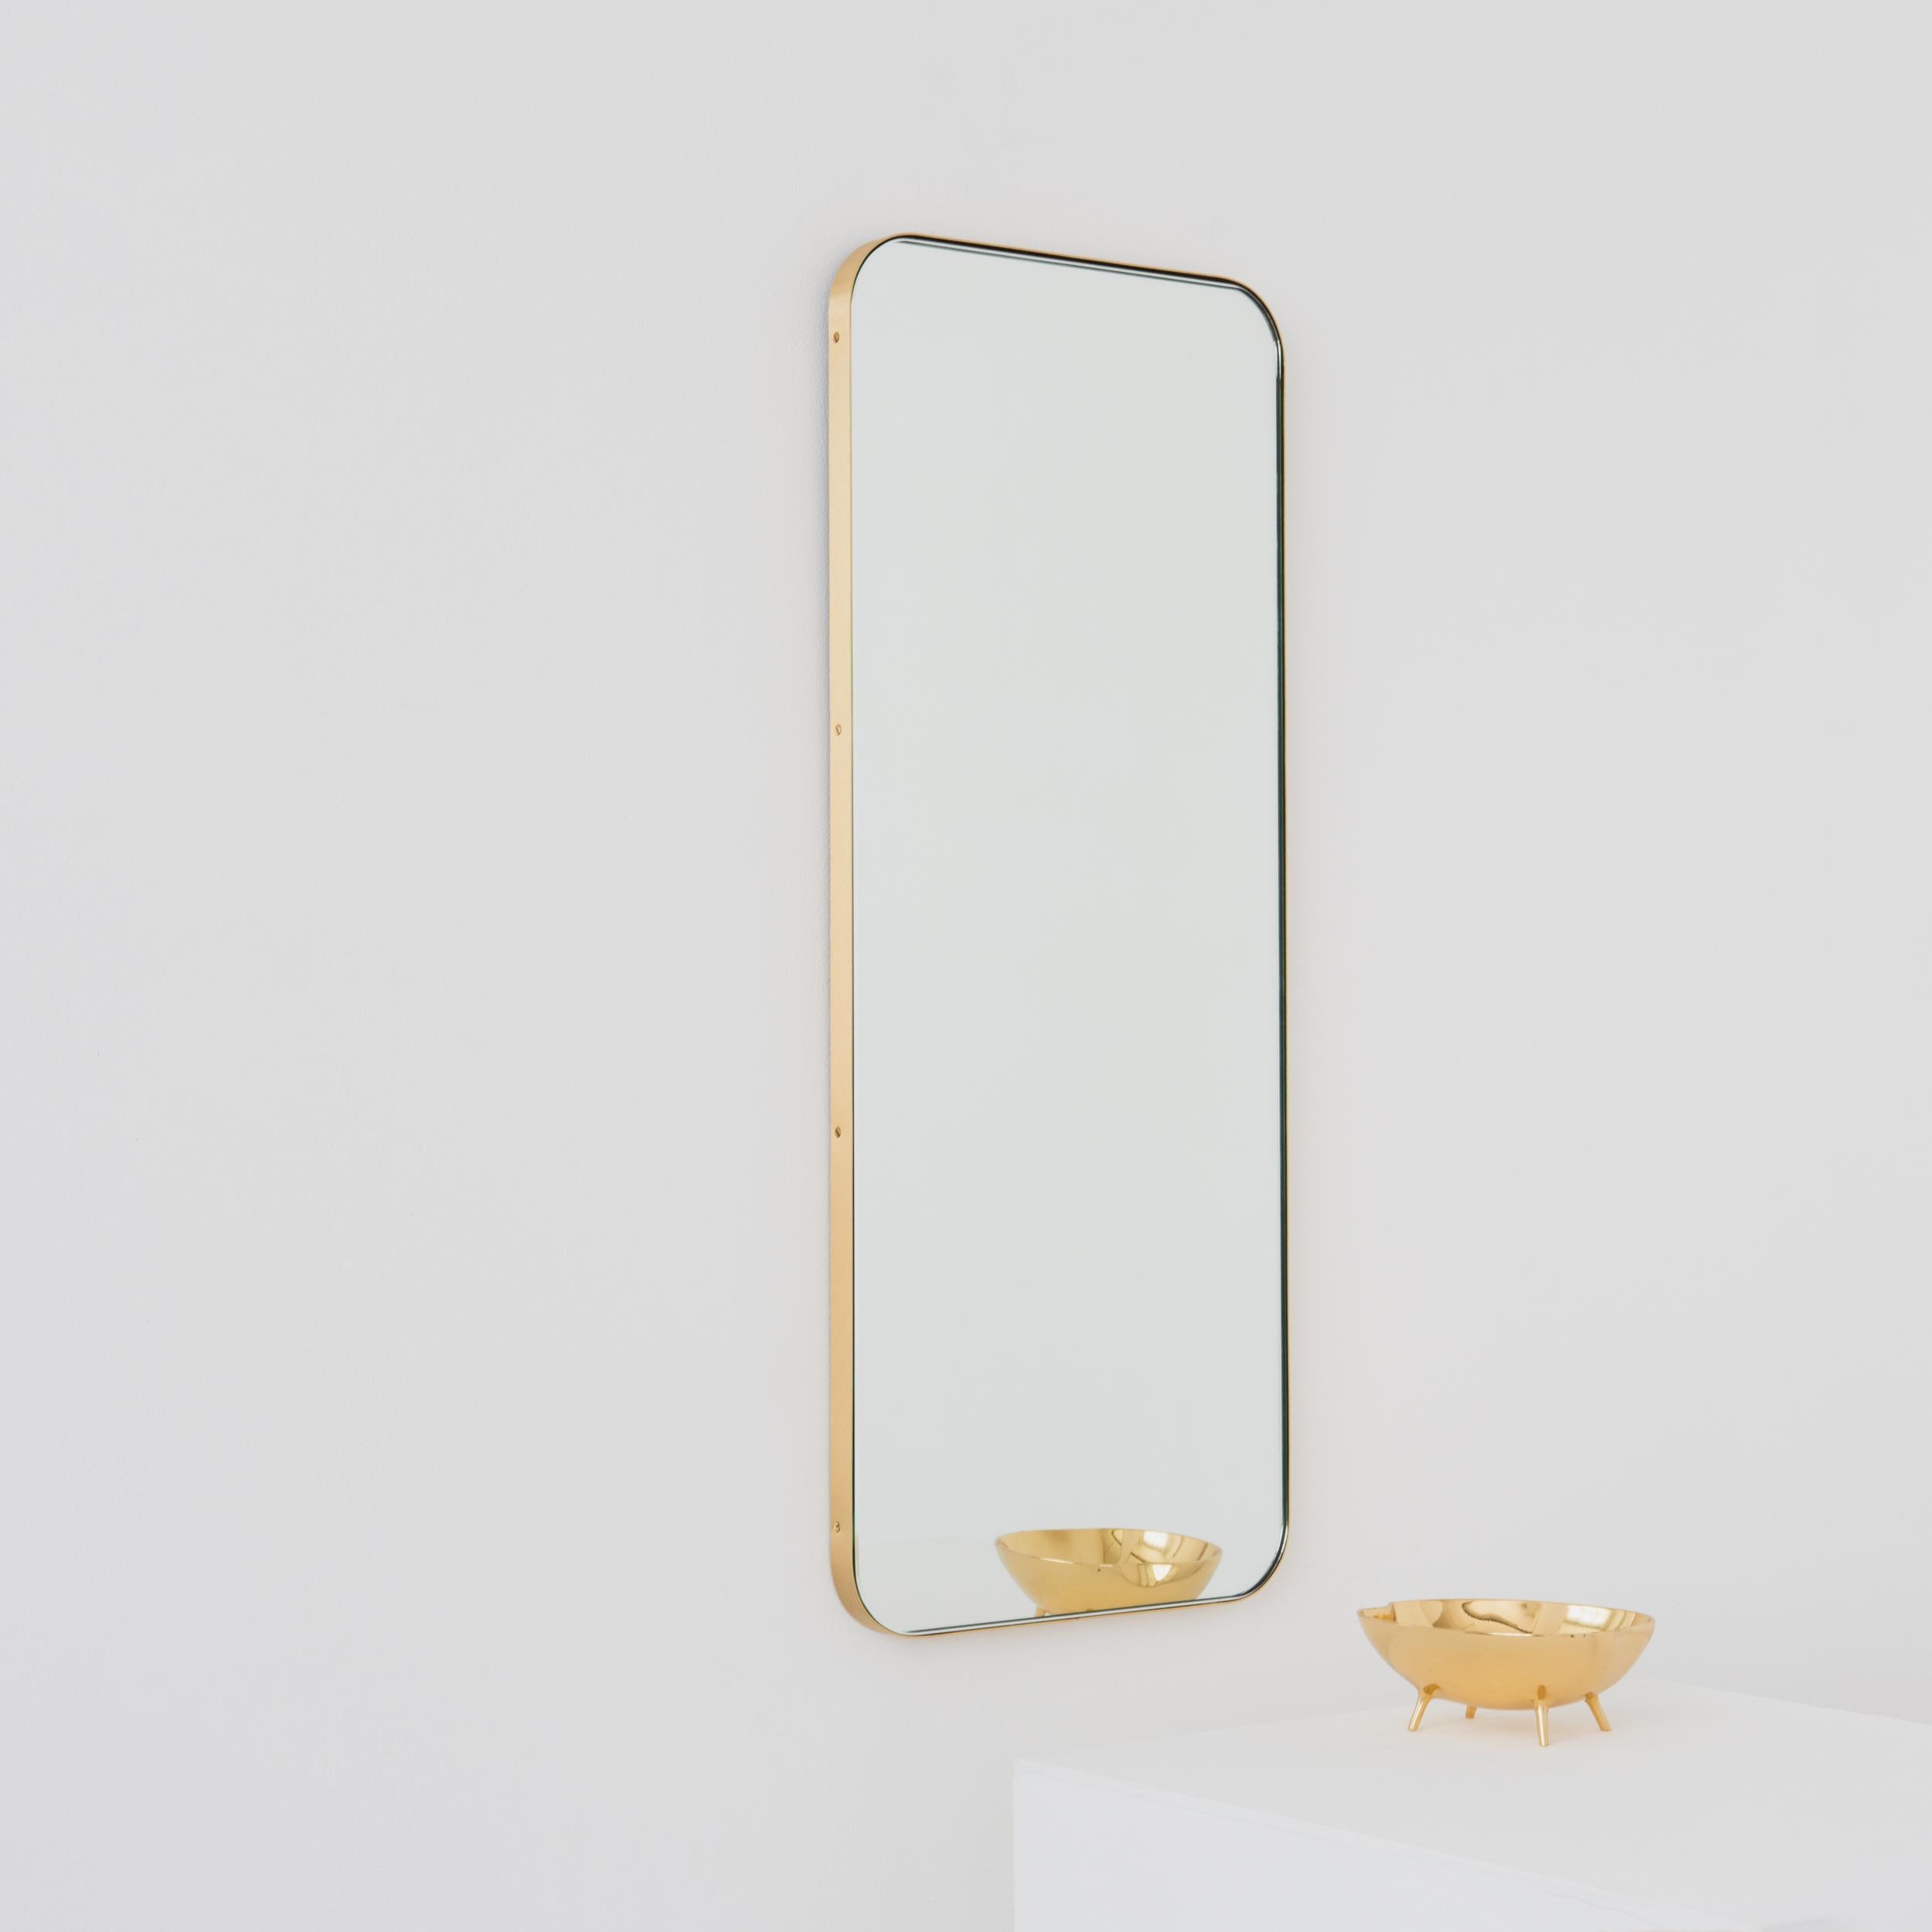 Modern Quadris™ rectangular mirror with an elegant solid brushed brass frame. Designed and made in London, UK. 

Our mirrors are designed with an integrated French cleat (split batten) system that ensures the mirror is securely mounted flush with